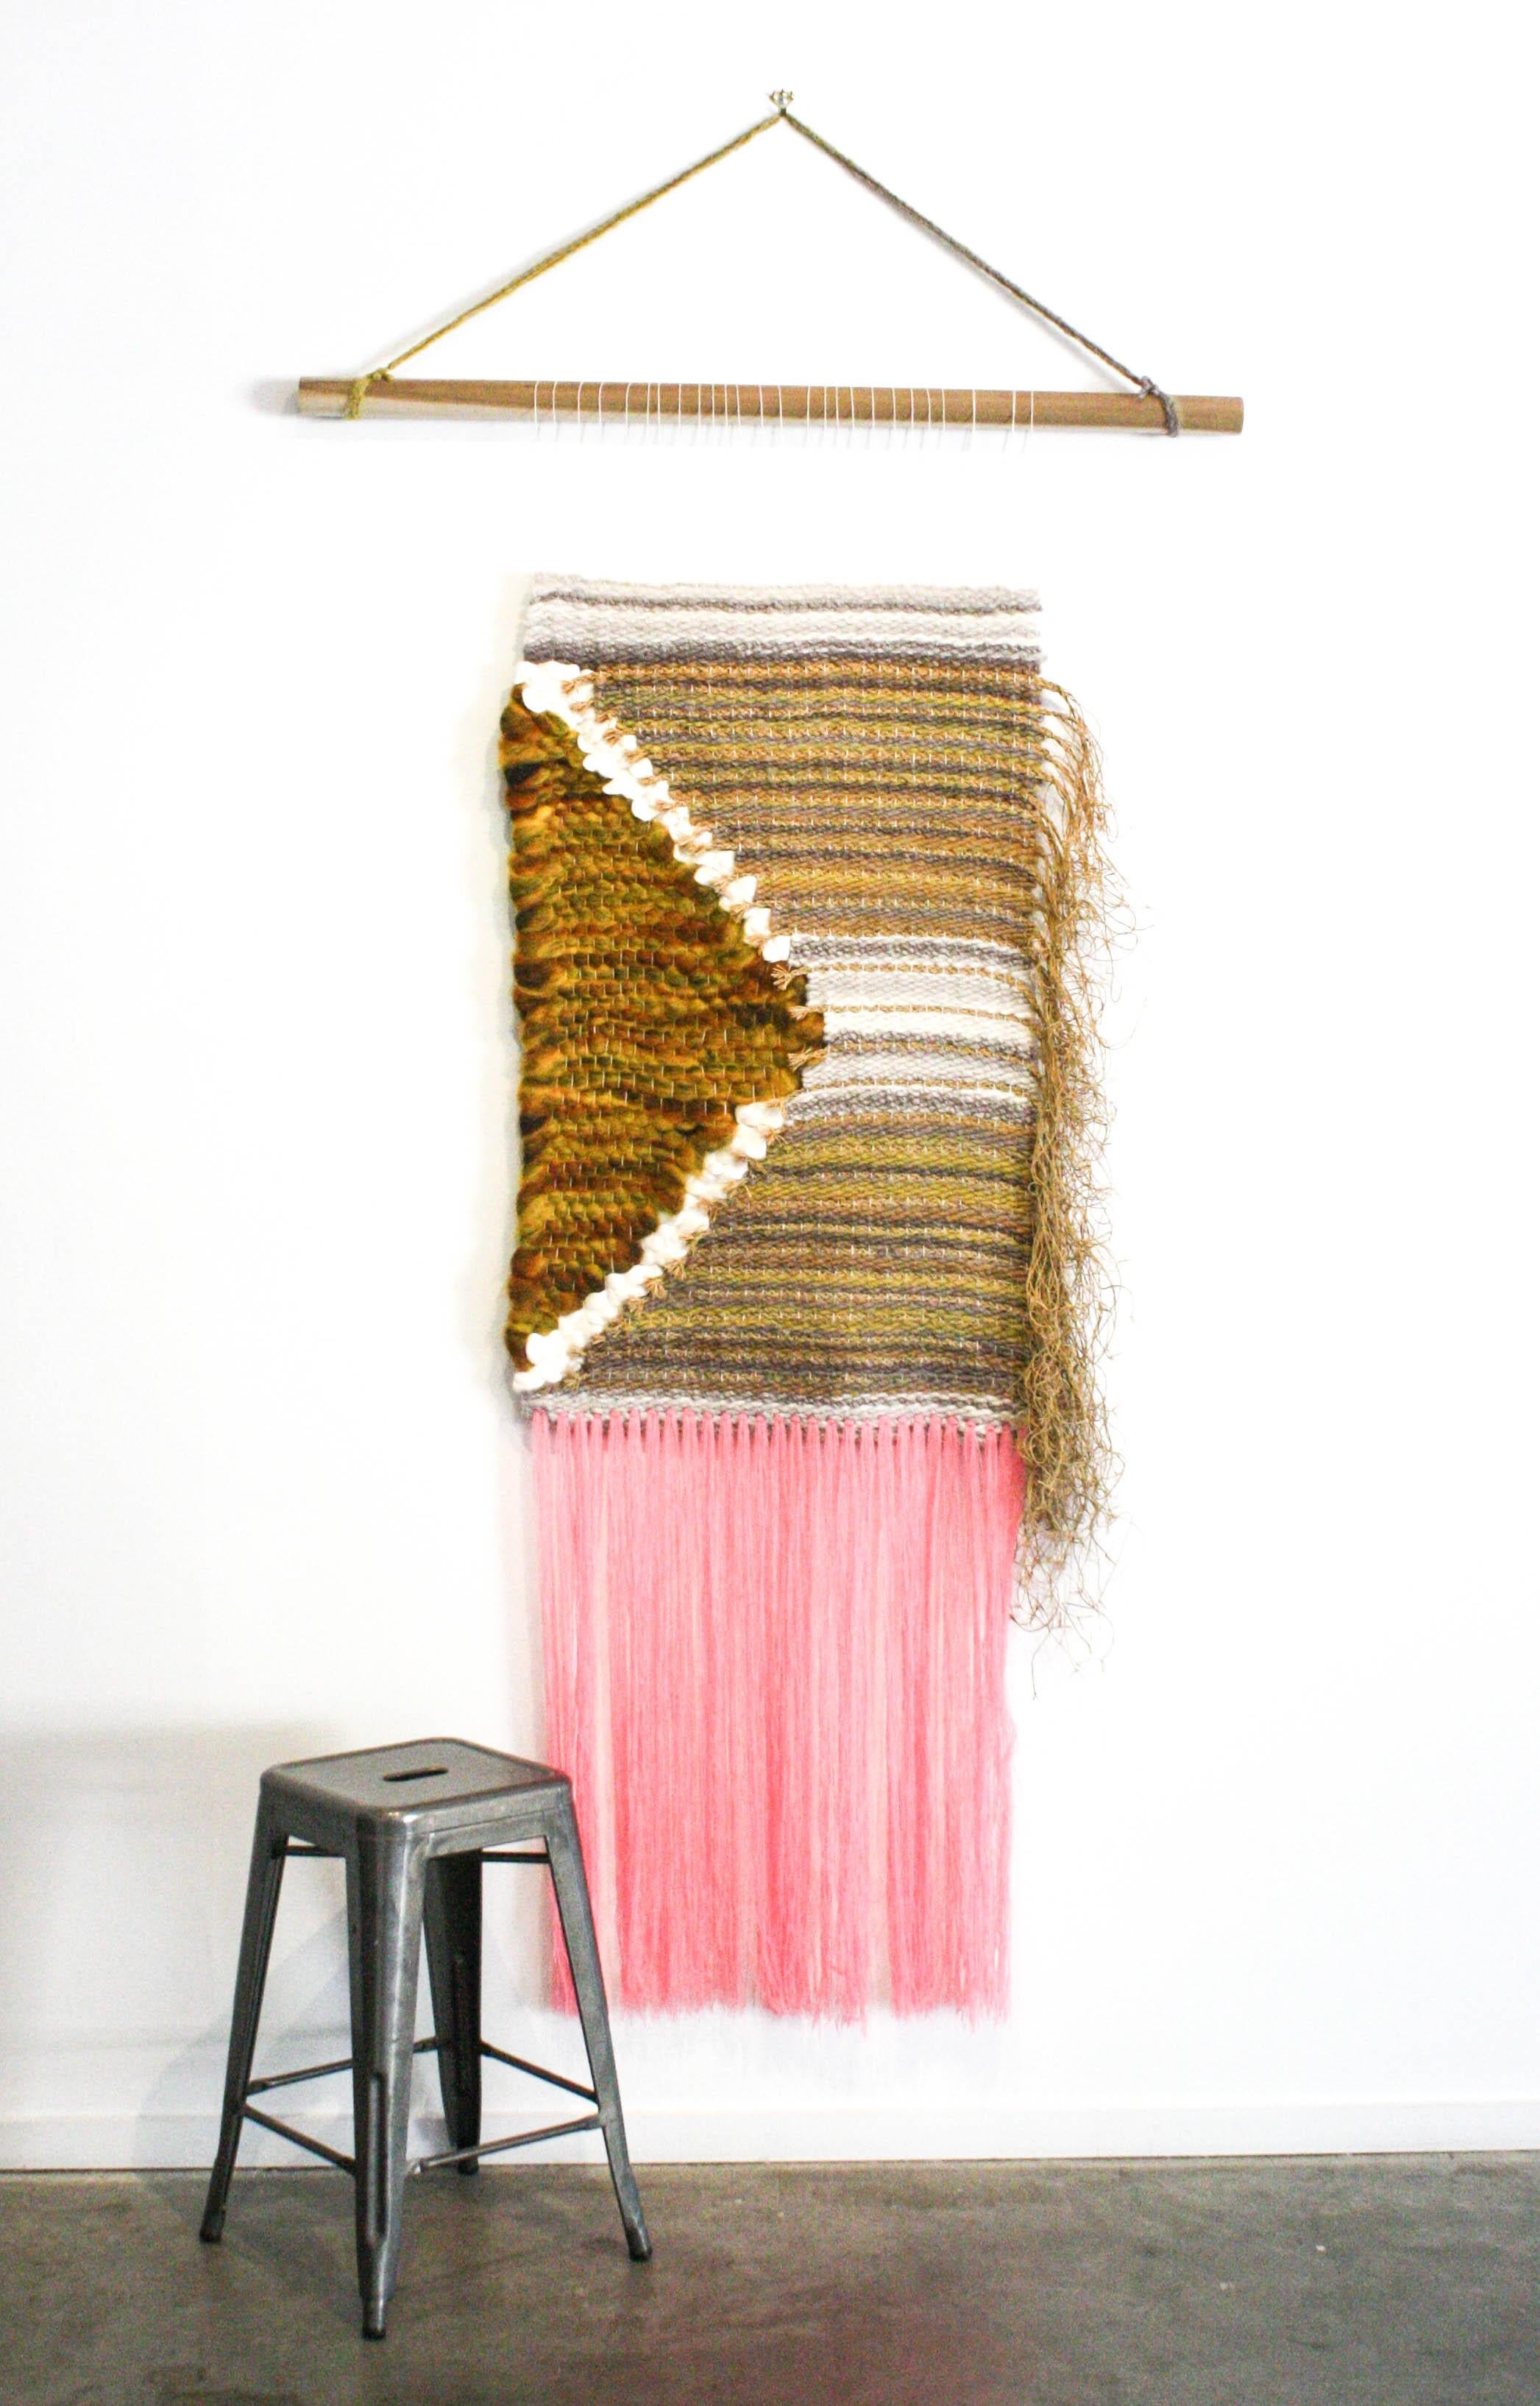 This woven sculptural wall hanging is made using green, brown, white, orange, and pink.

Pam Marlene Taylor is a fiber artist living and working in Nashville, Tennessee. She is a graduate from Tusculum University where she double majored in Studio